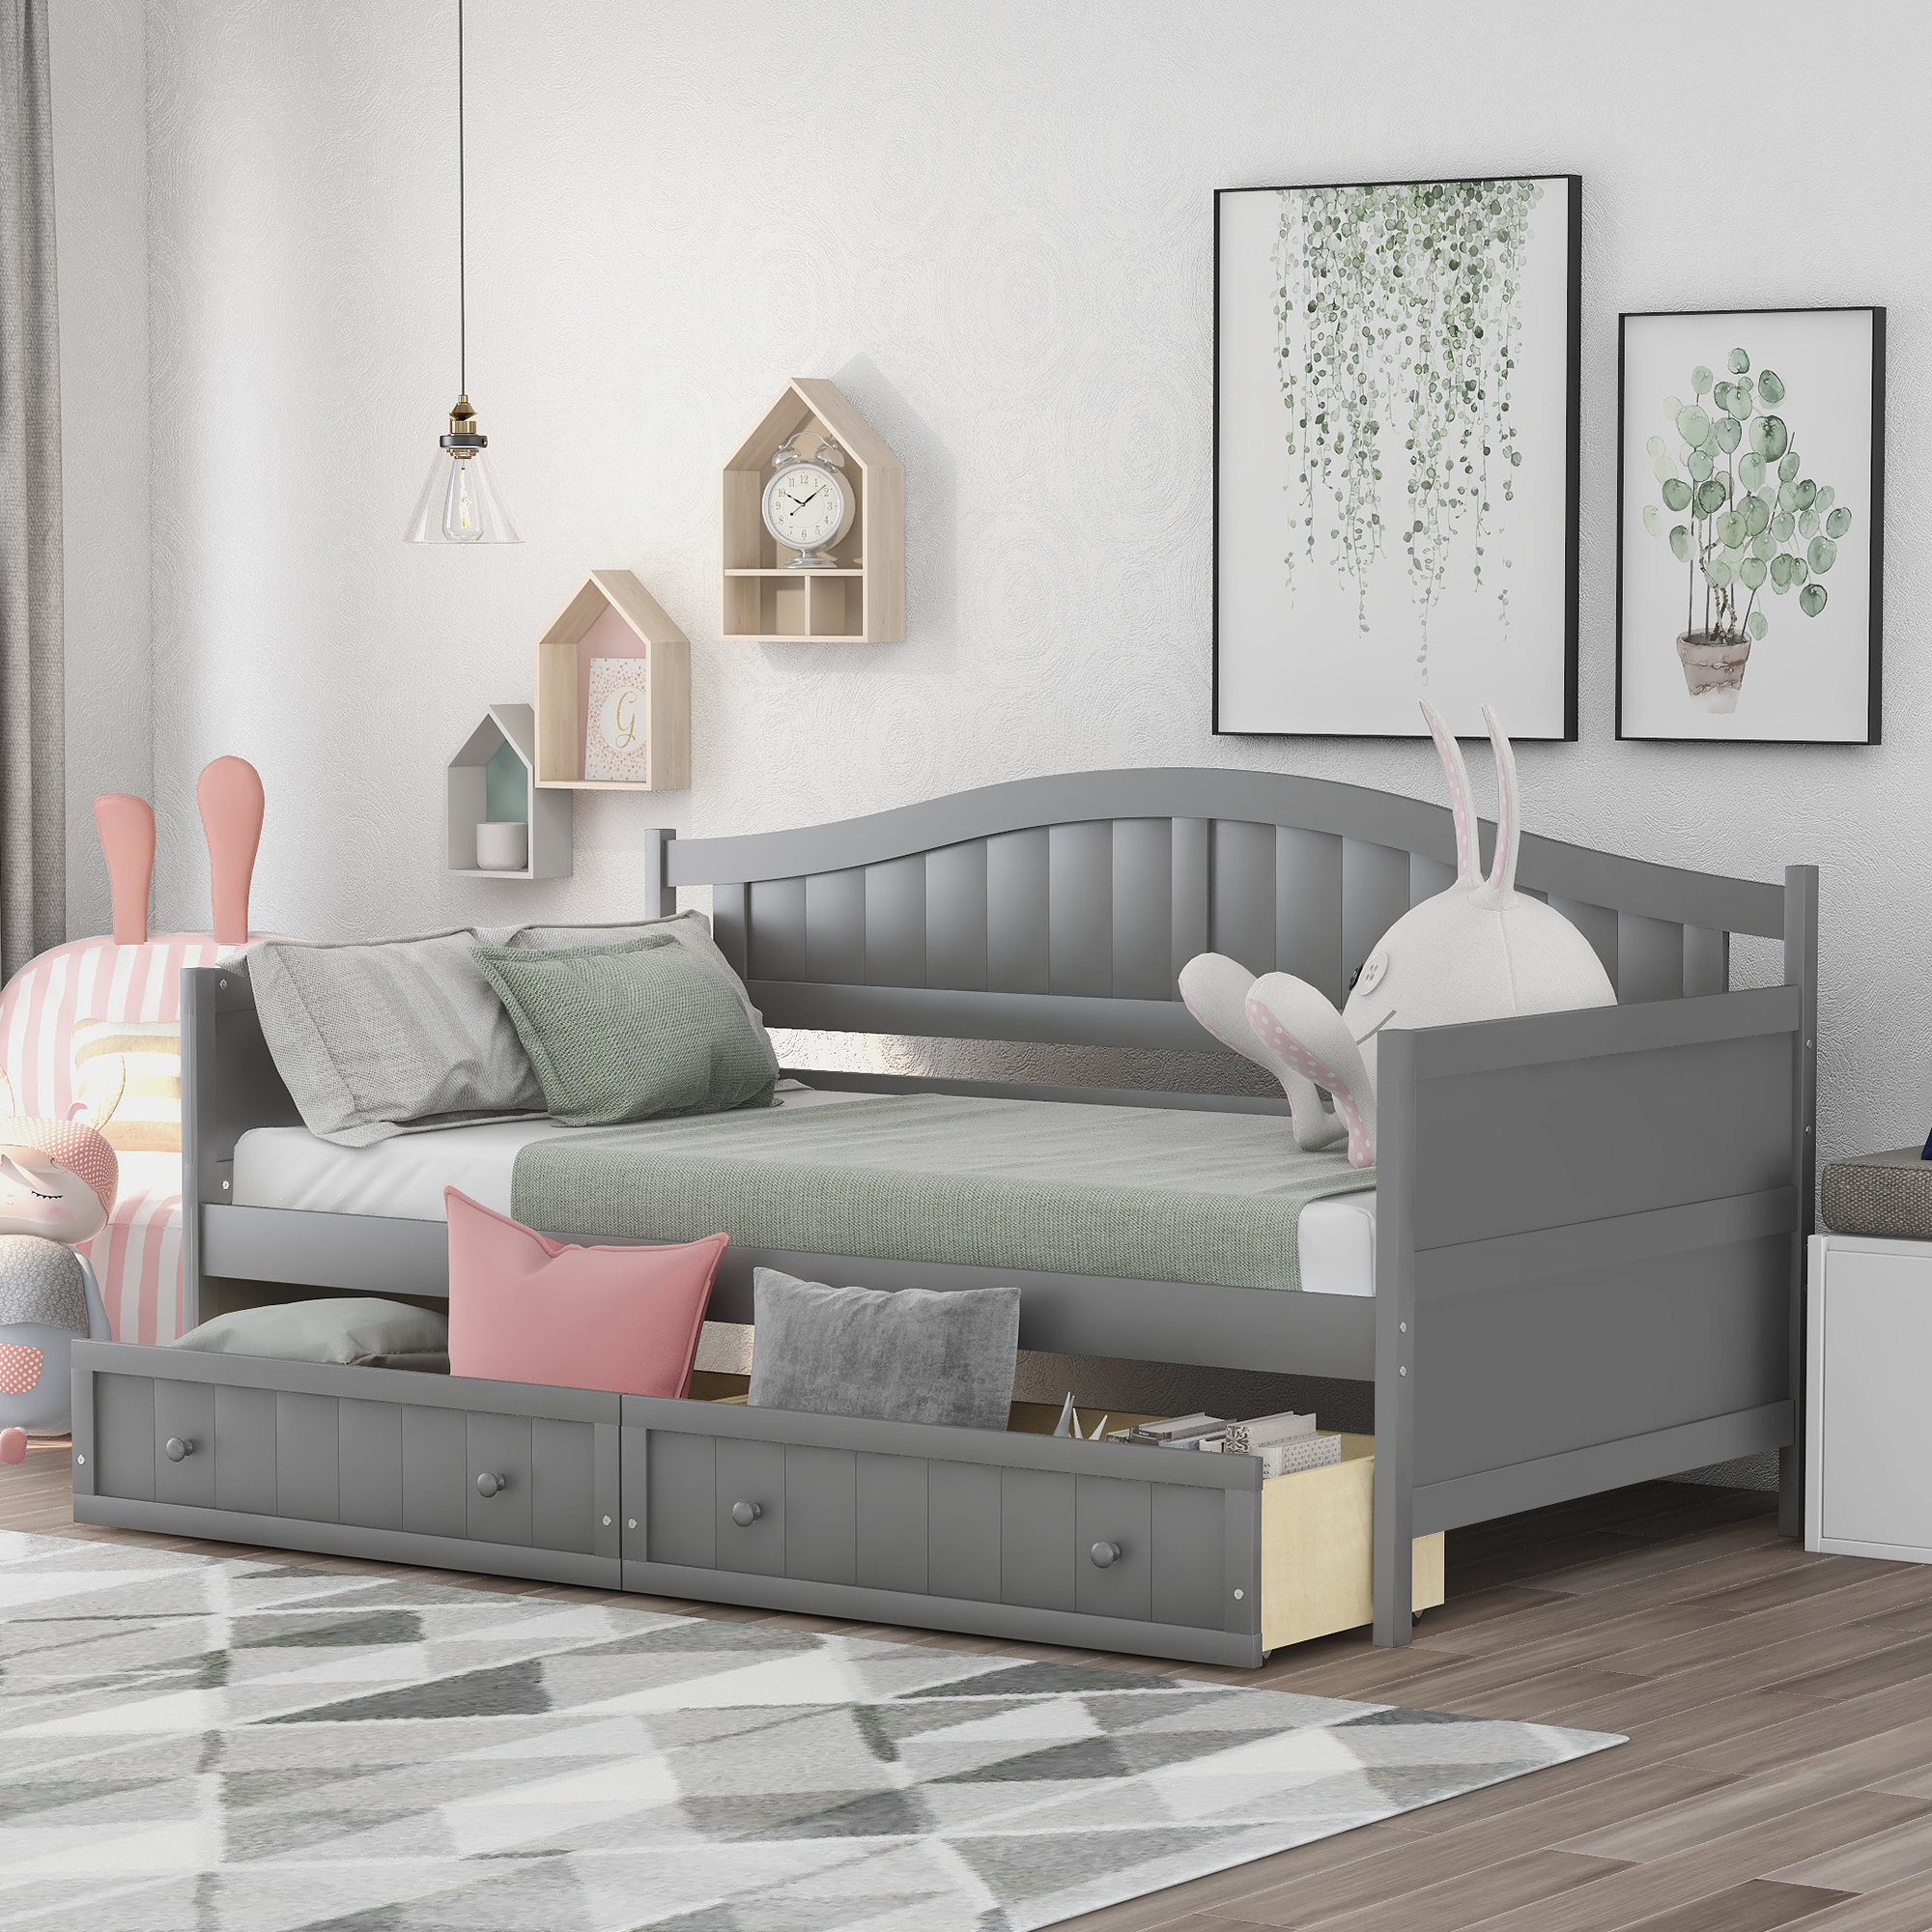 Twin Wooden Daybed with 2 drawers, Sofa Bed for Bedroom Living Room,No Box Spring Needed,Gray-Boyel Living